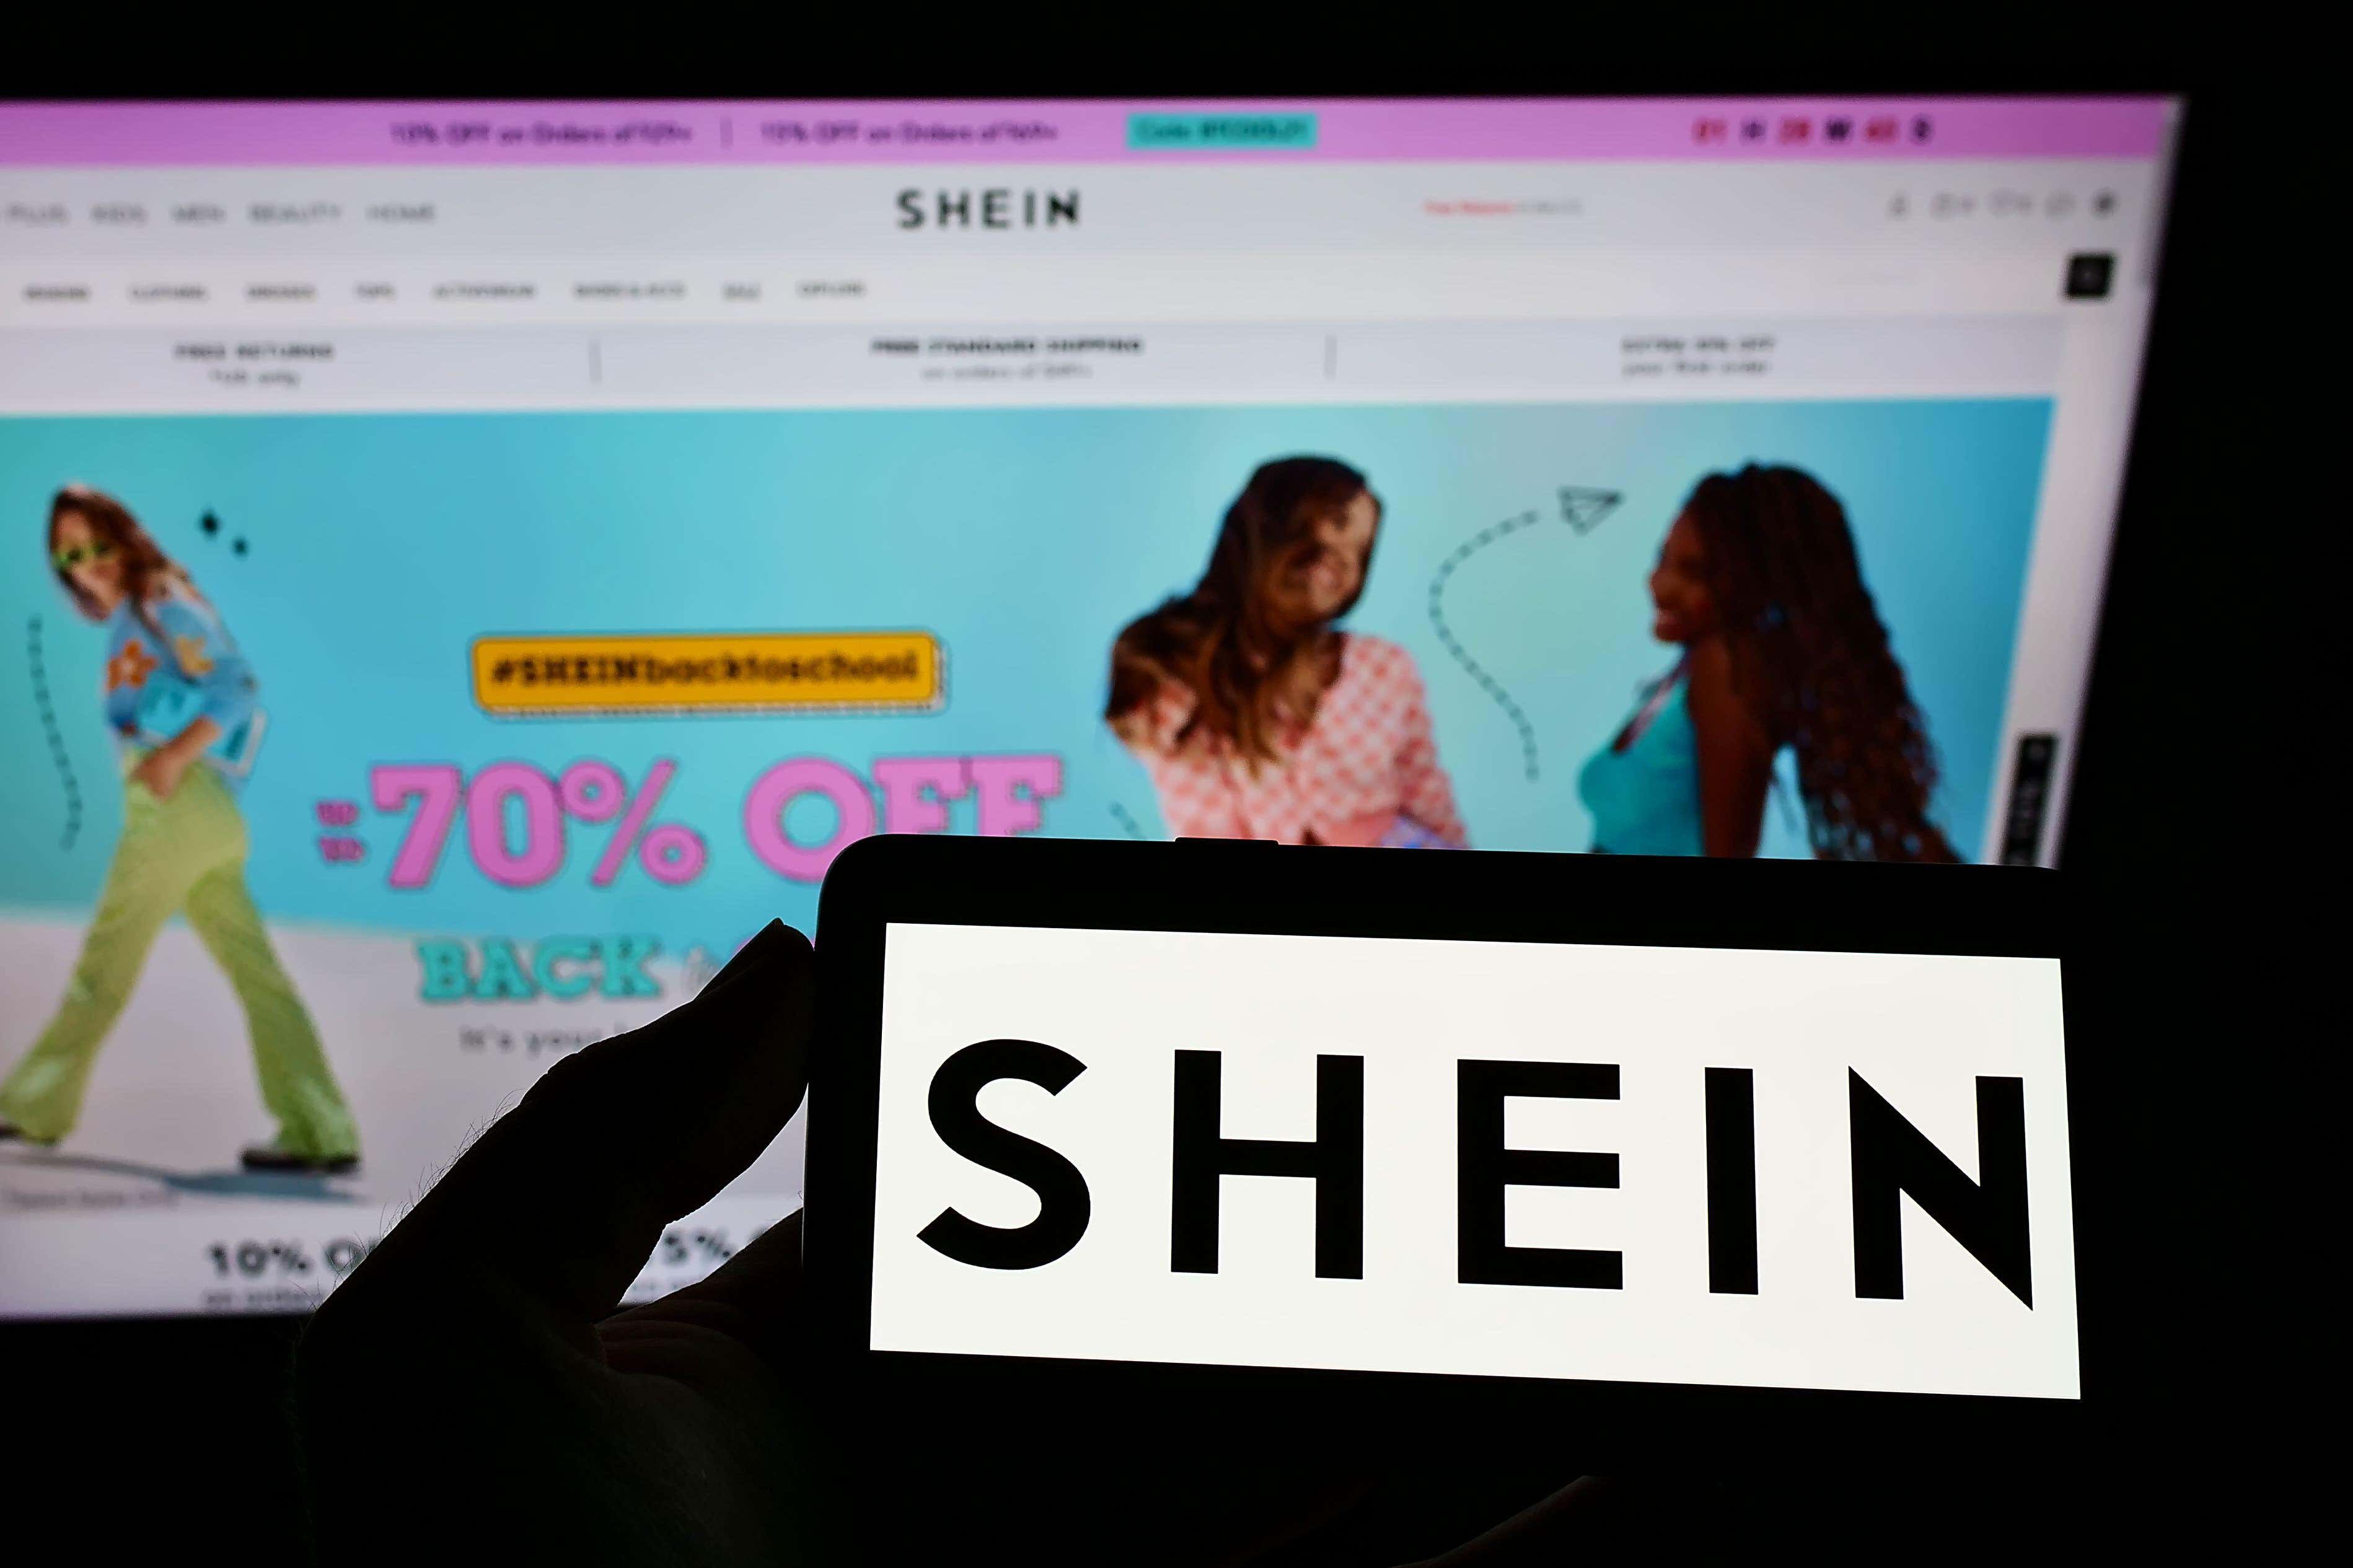 Chinese fashion retailer Shein has vowed to invest 15 million US dollars (£12.2 million) in improving standards at its supplier factories as it admitted working hours at two sites breached local regulations. (Alamy/PA)